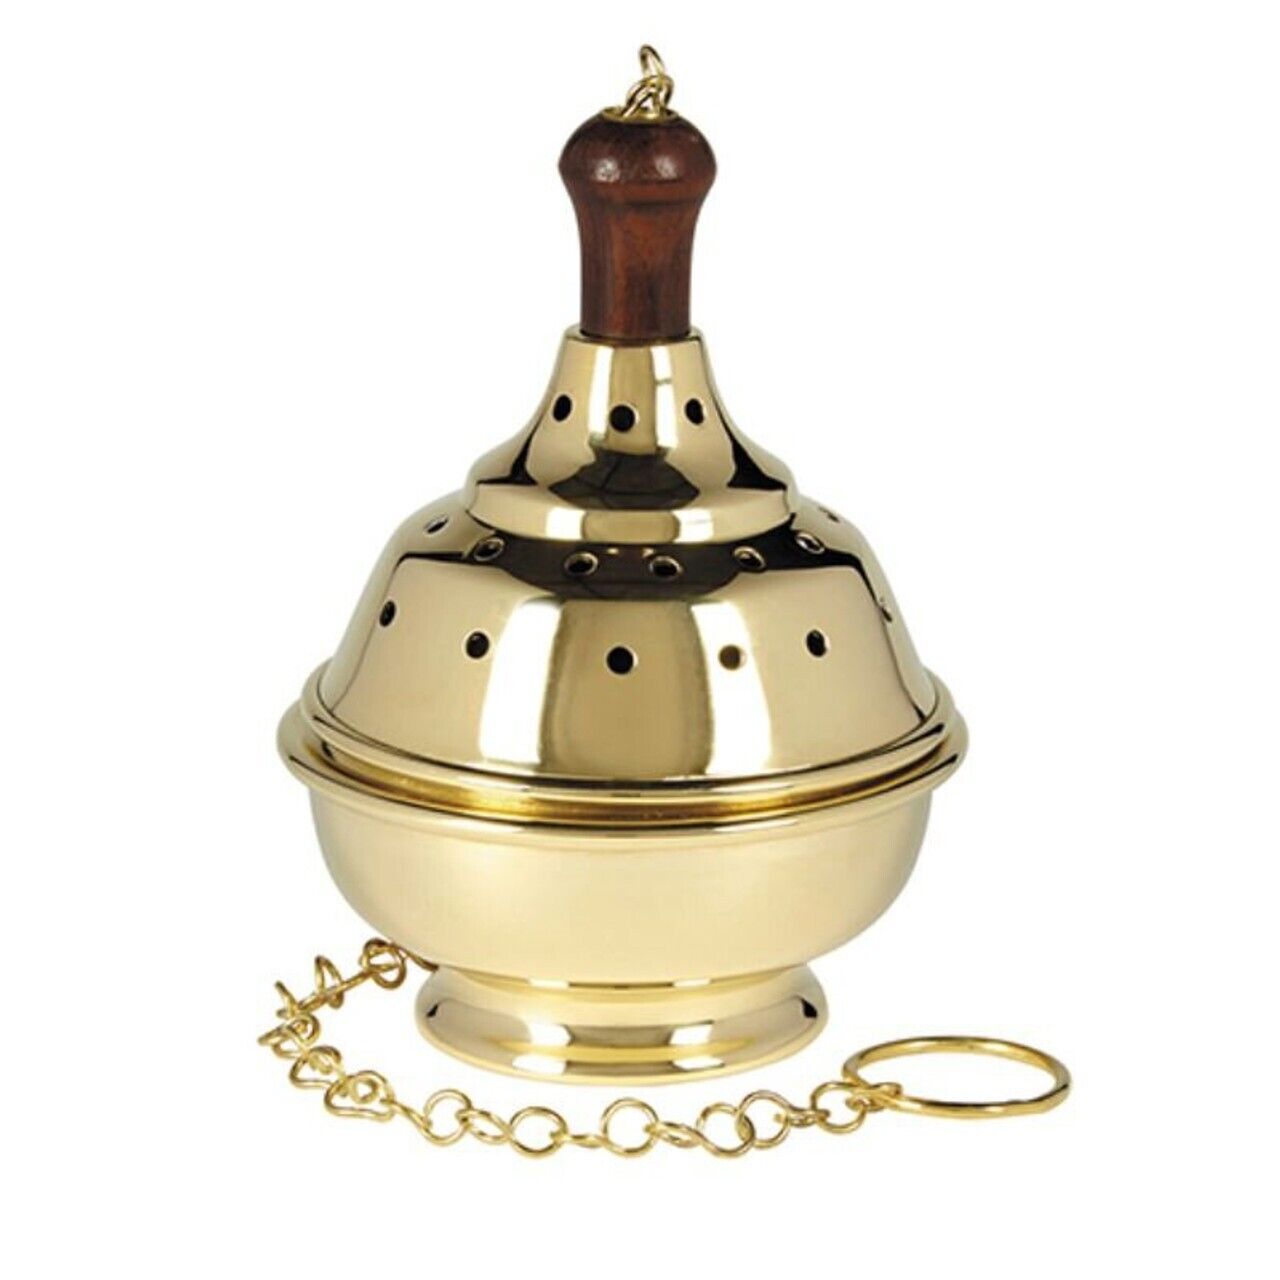 Polished Brass Orthodox Single Chain Round Censer For Church or Sanctuary 8 In